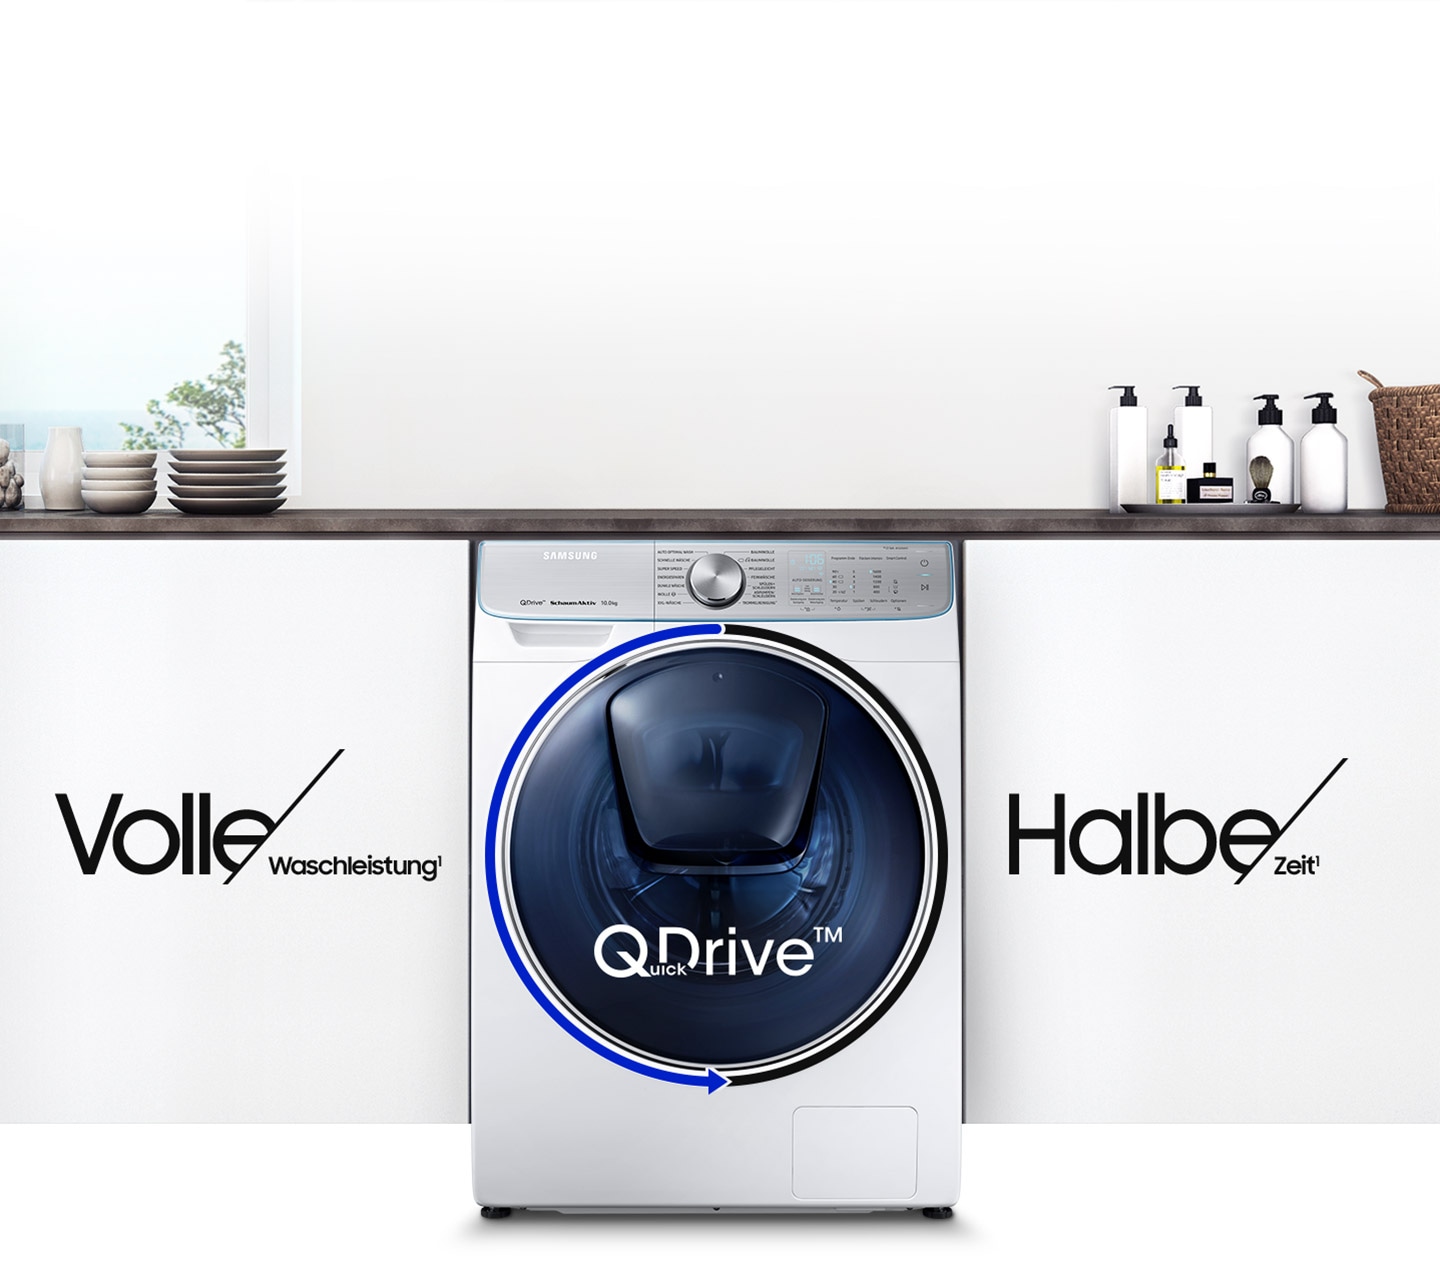 An image showing a QuickDrive device installed in an indoor setting, with text that reads  "Half the Time" and "No Compromise on Washing Performance.